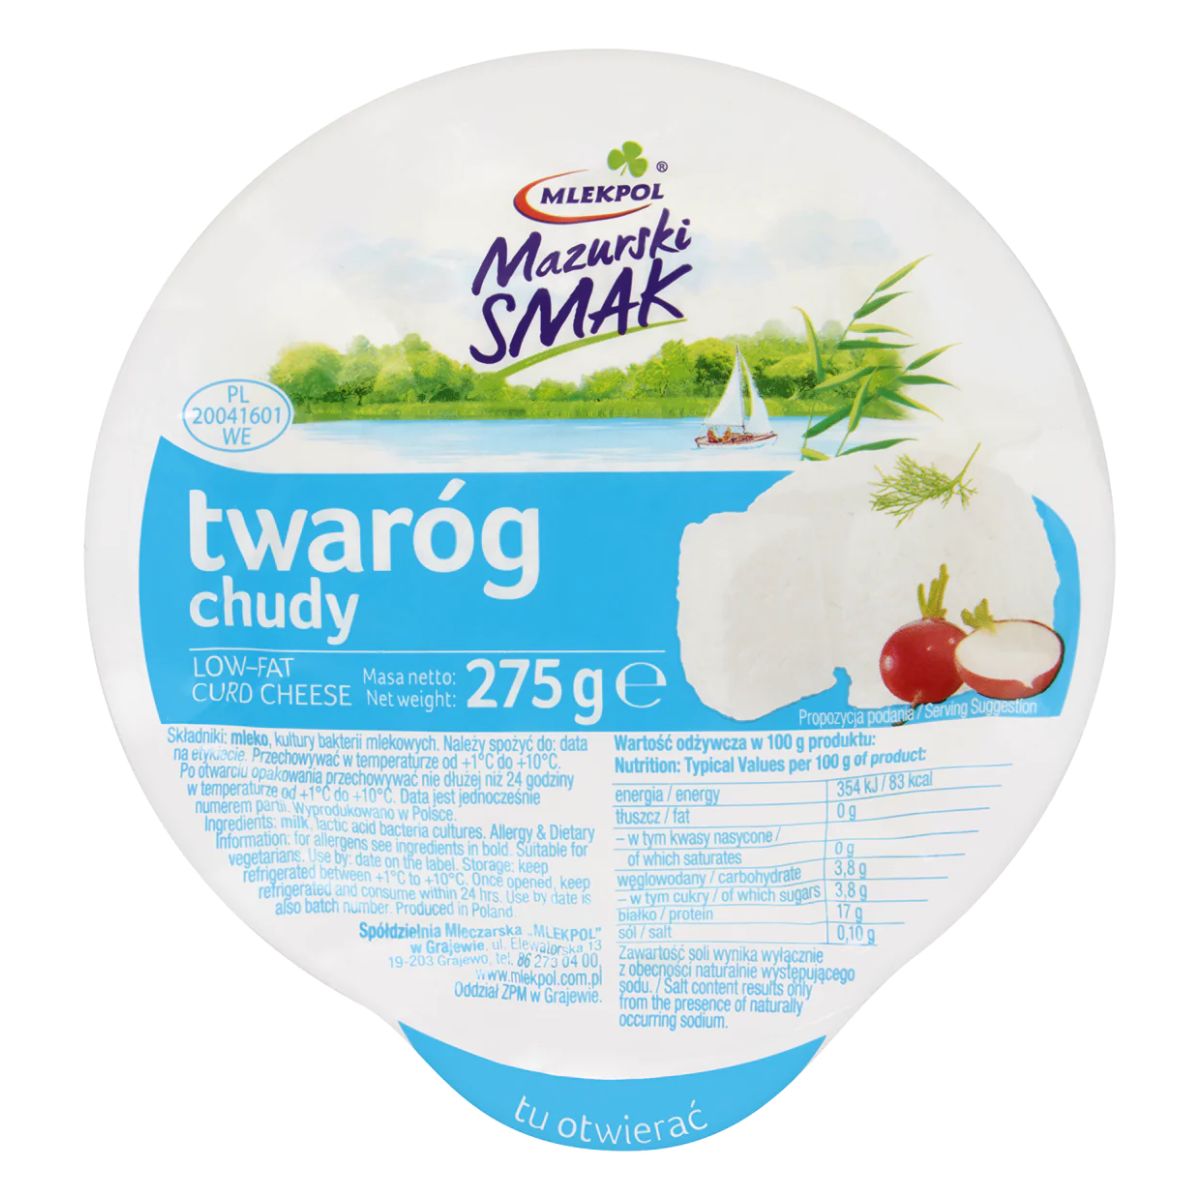 Mlekpol Low-fat Cottage Cheese packaging label with nutritional information and a picturesque lakeside view.